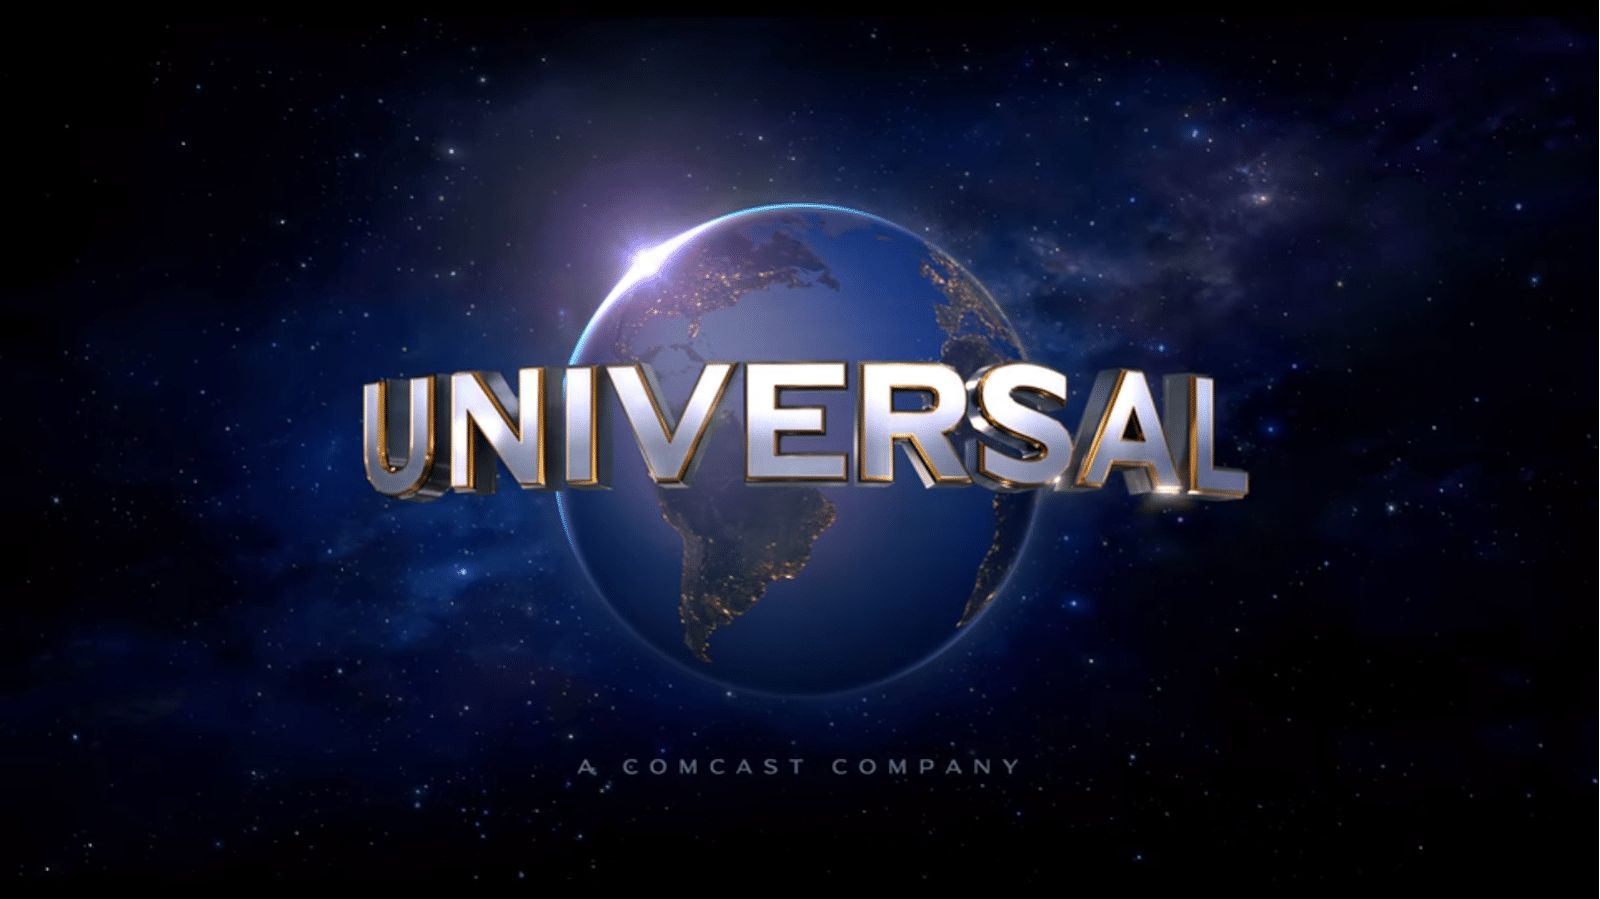 AMC Will No Longer Show Universal Studio's Projects After NBCUniversal